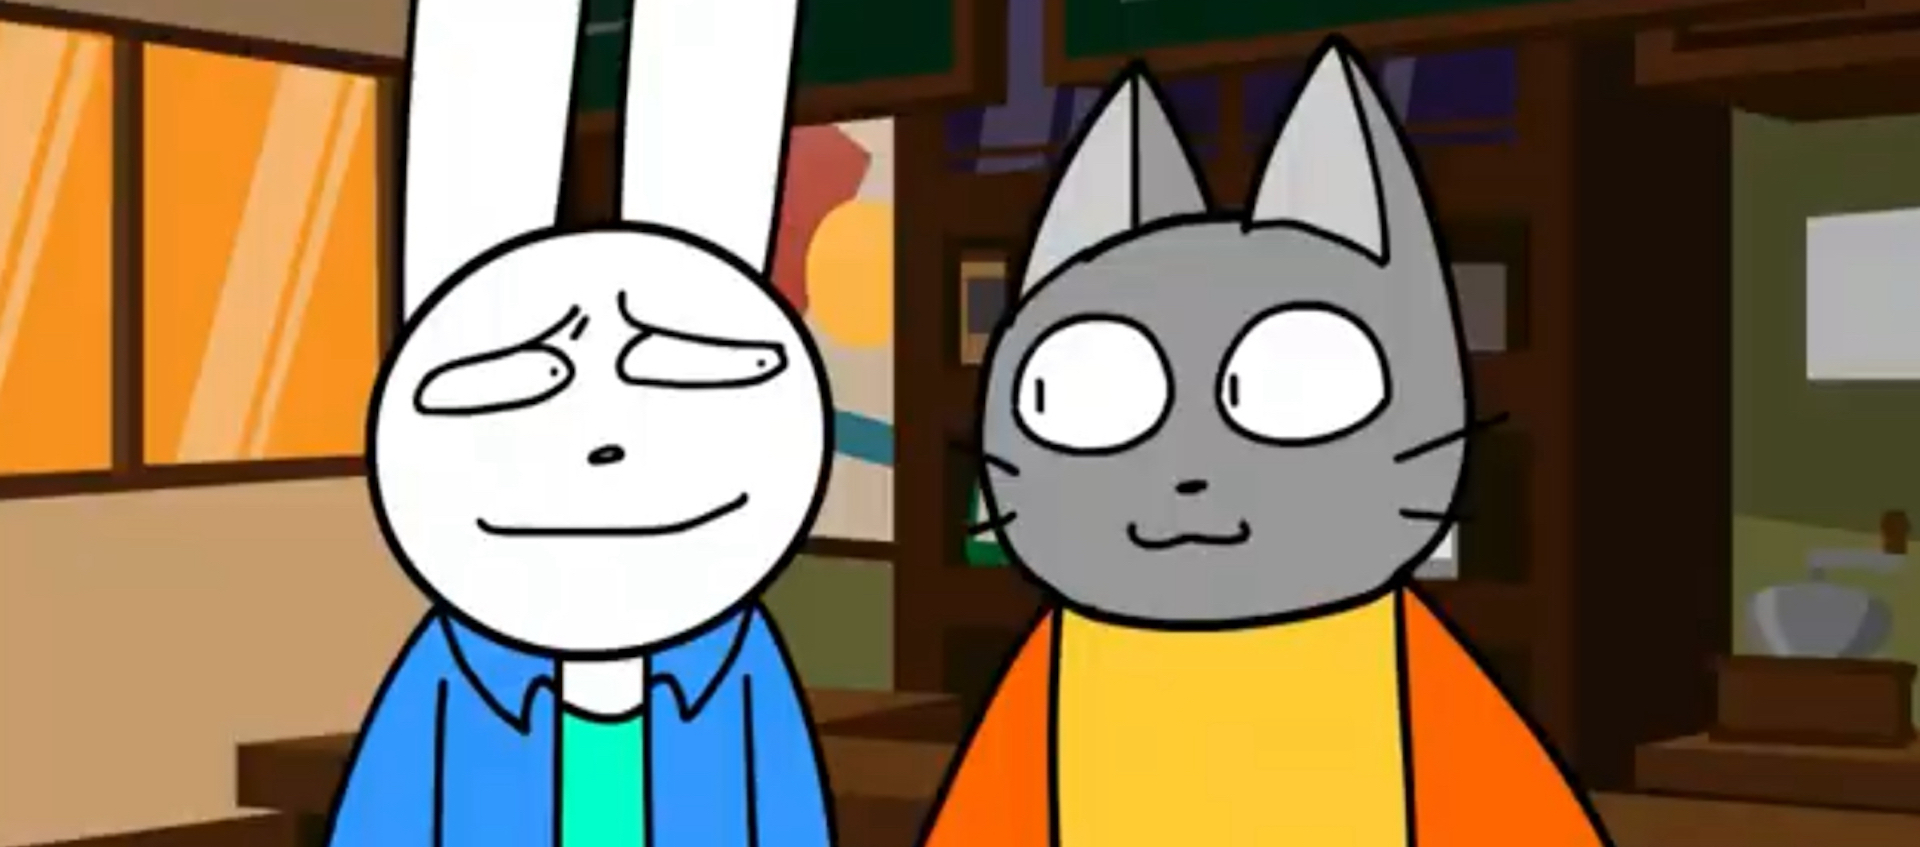 Colorful still from an animated short with a bunny and a cat standing upright in human clothing. They're at the center of the frame, looking at one another.